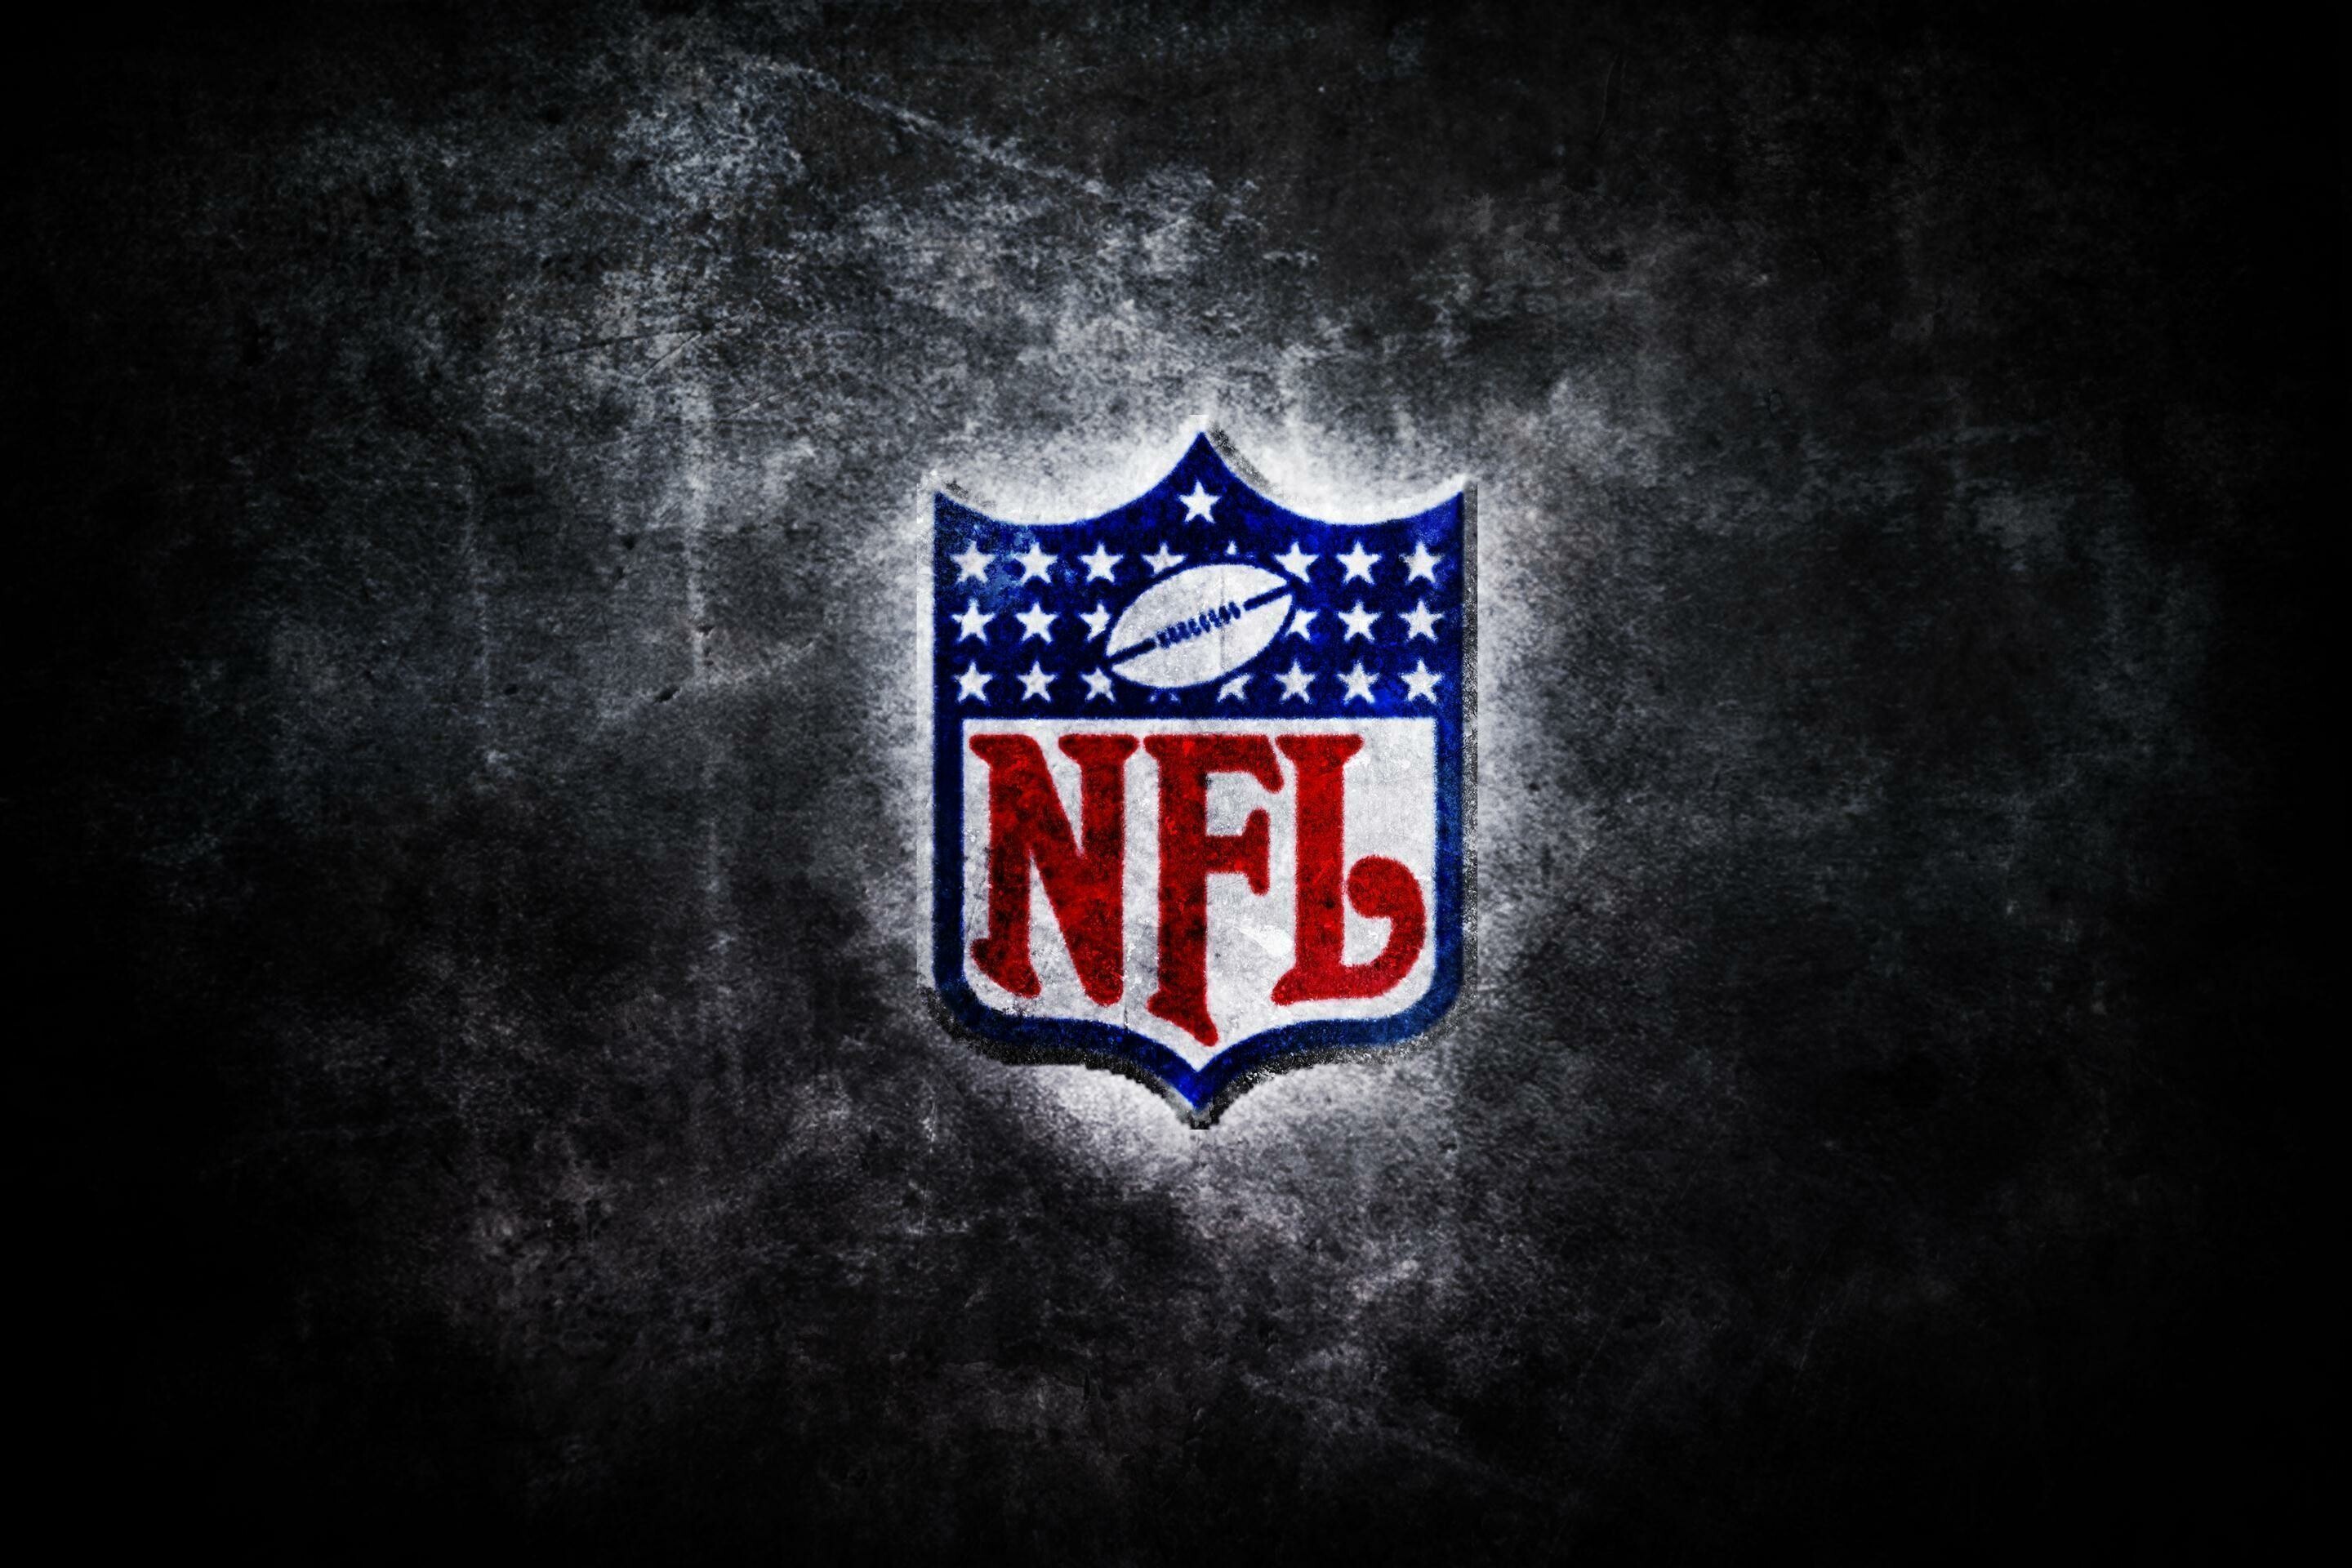 NFL Wallpaper: HD, 4K, 5K for PC and Mobile. Download free image for iPhone, Android